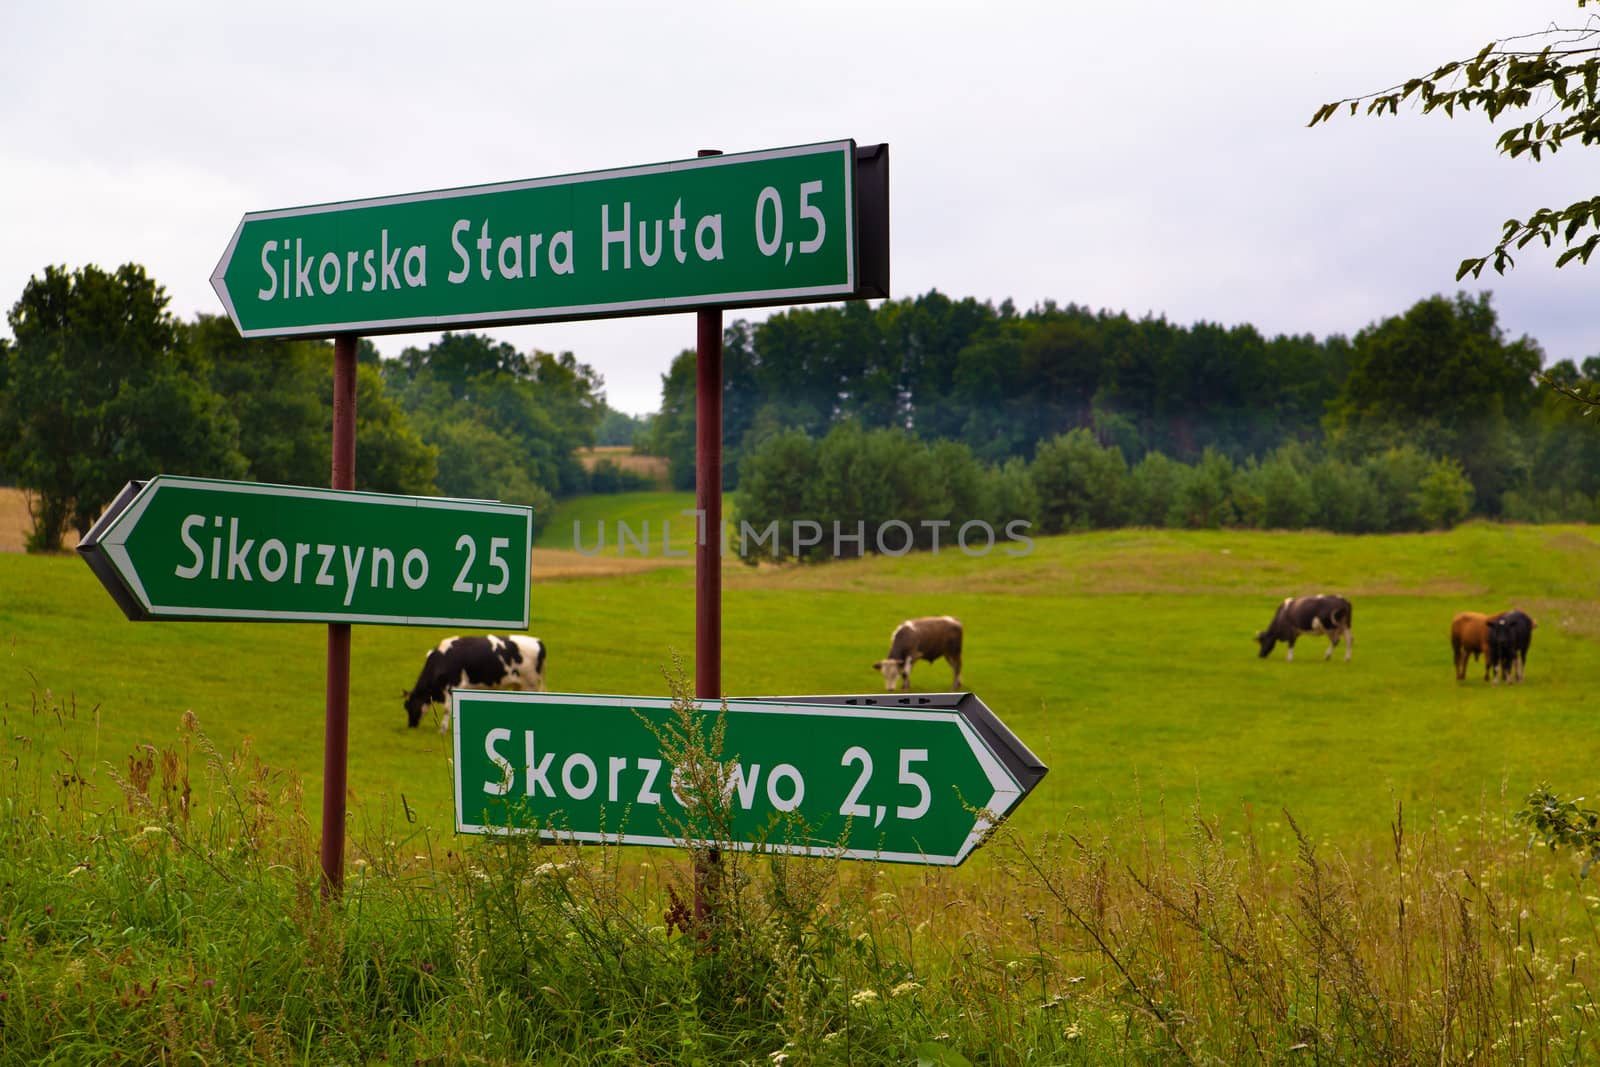 Sign with village directions at Polish countryside
